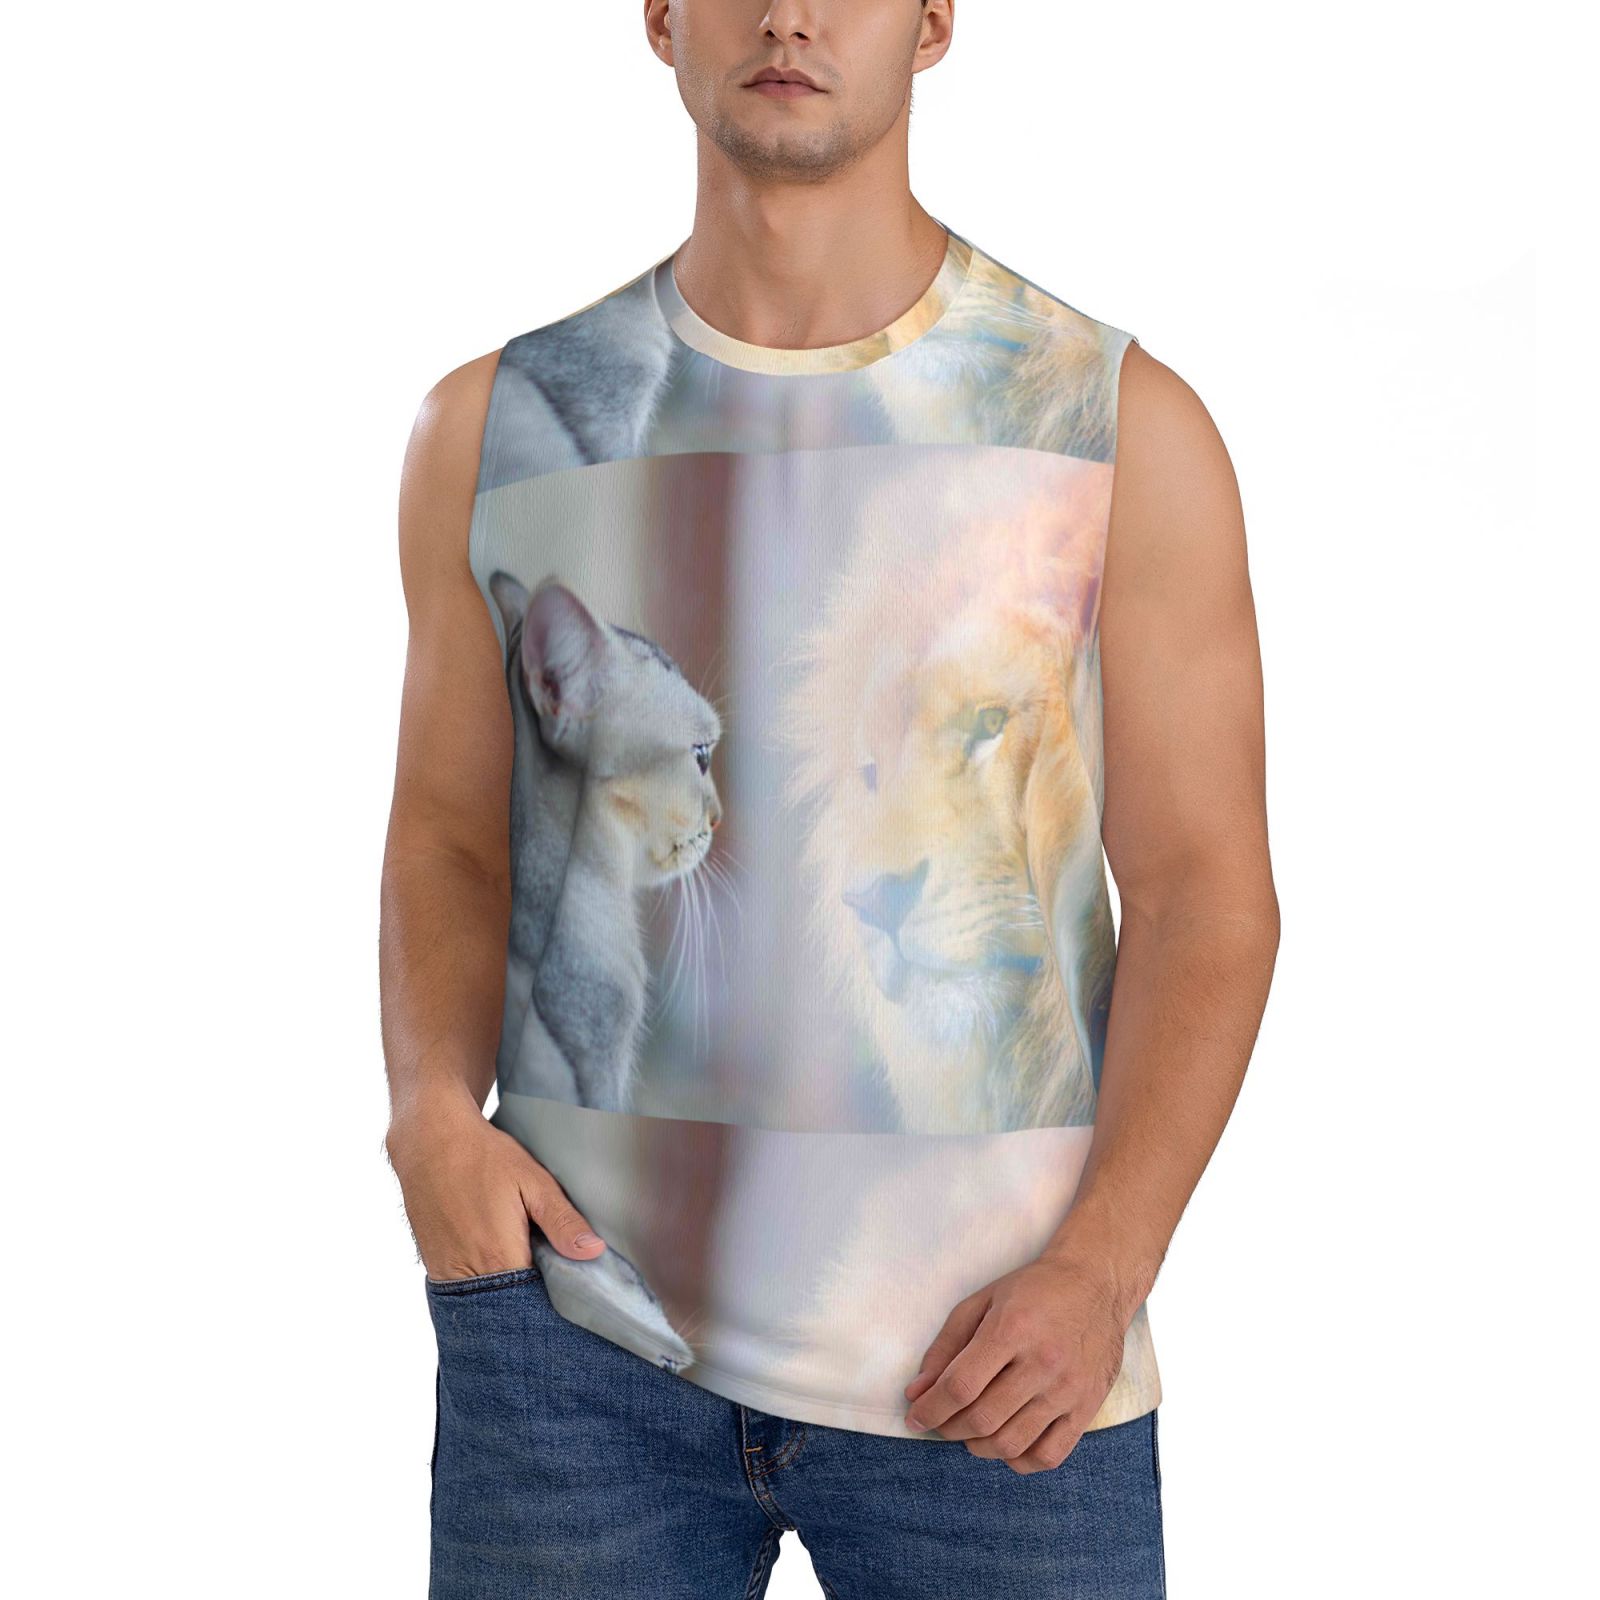 Disketp The Cat Looks In The Mirror Sleeveless Tshirts For Men, Muscle ...